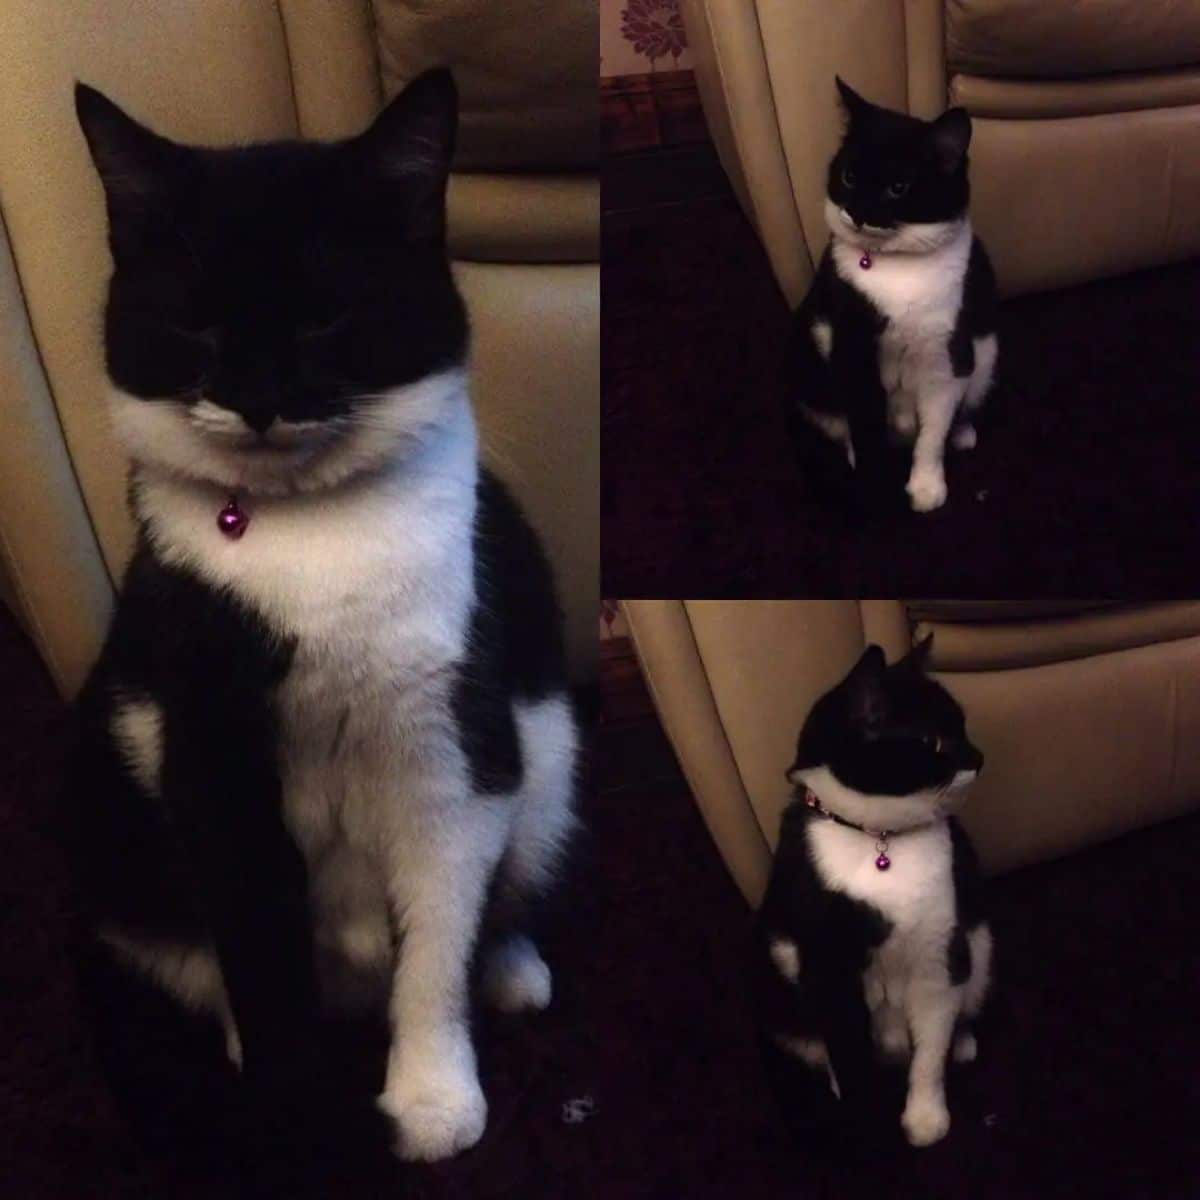 3 photos of a black and whtie cat sitting with three quarters of the face black and the rest is white